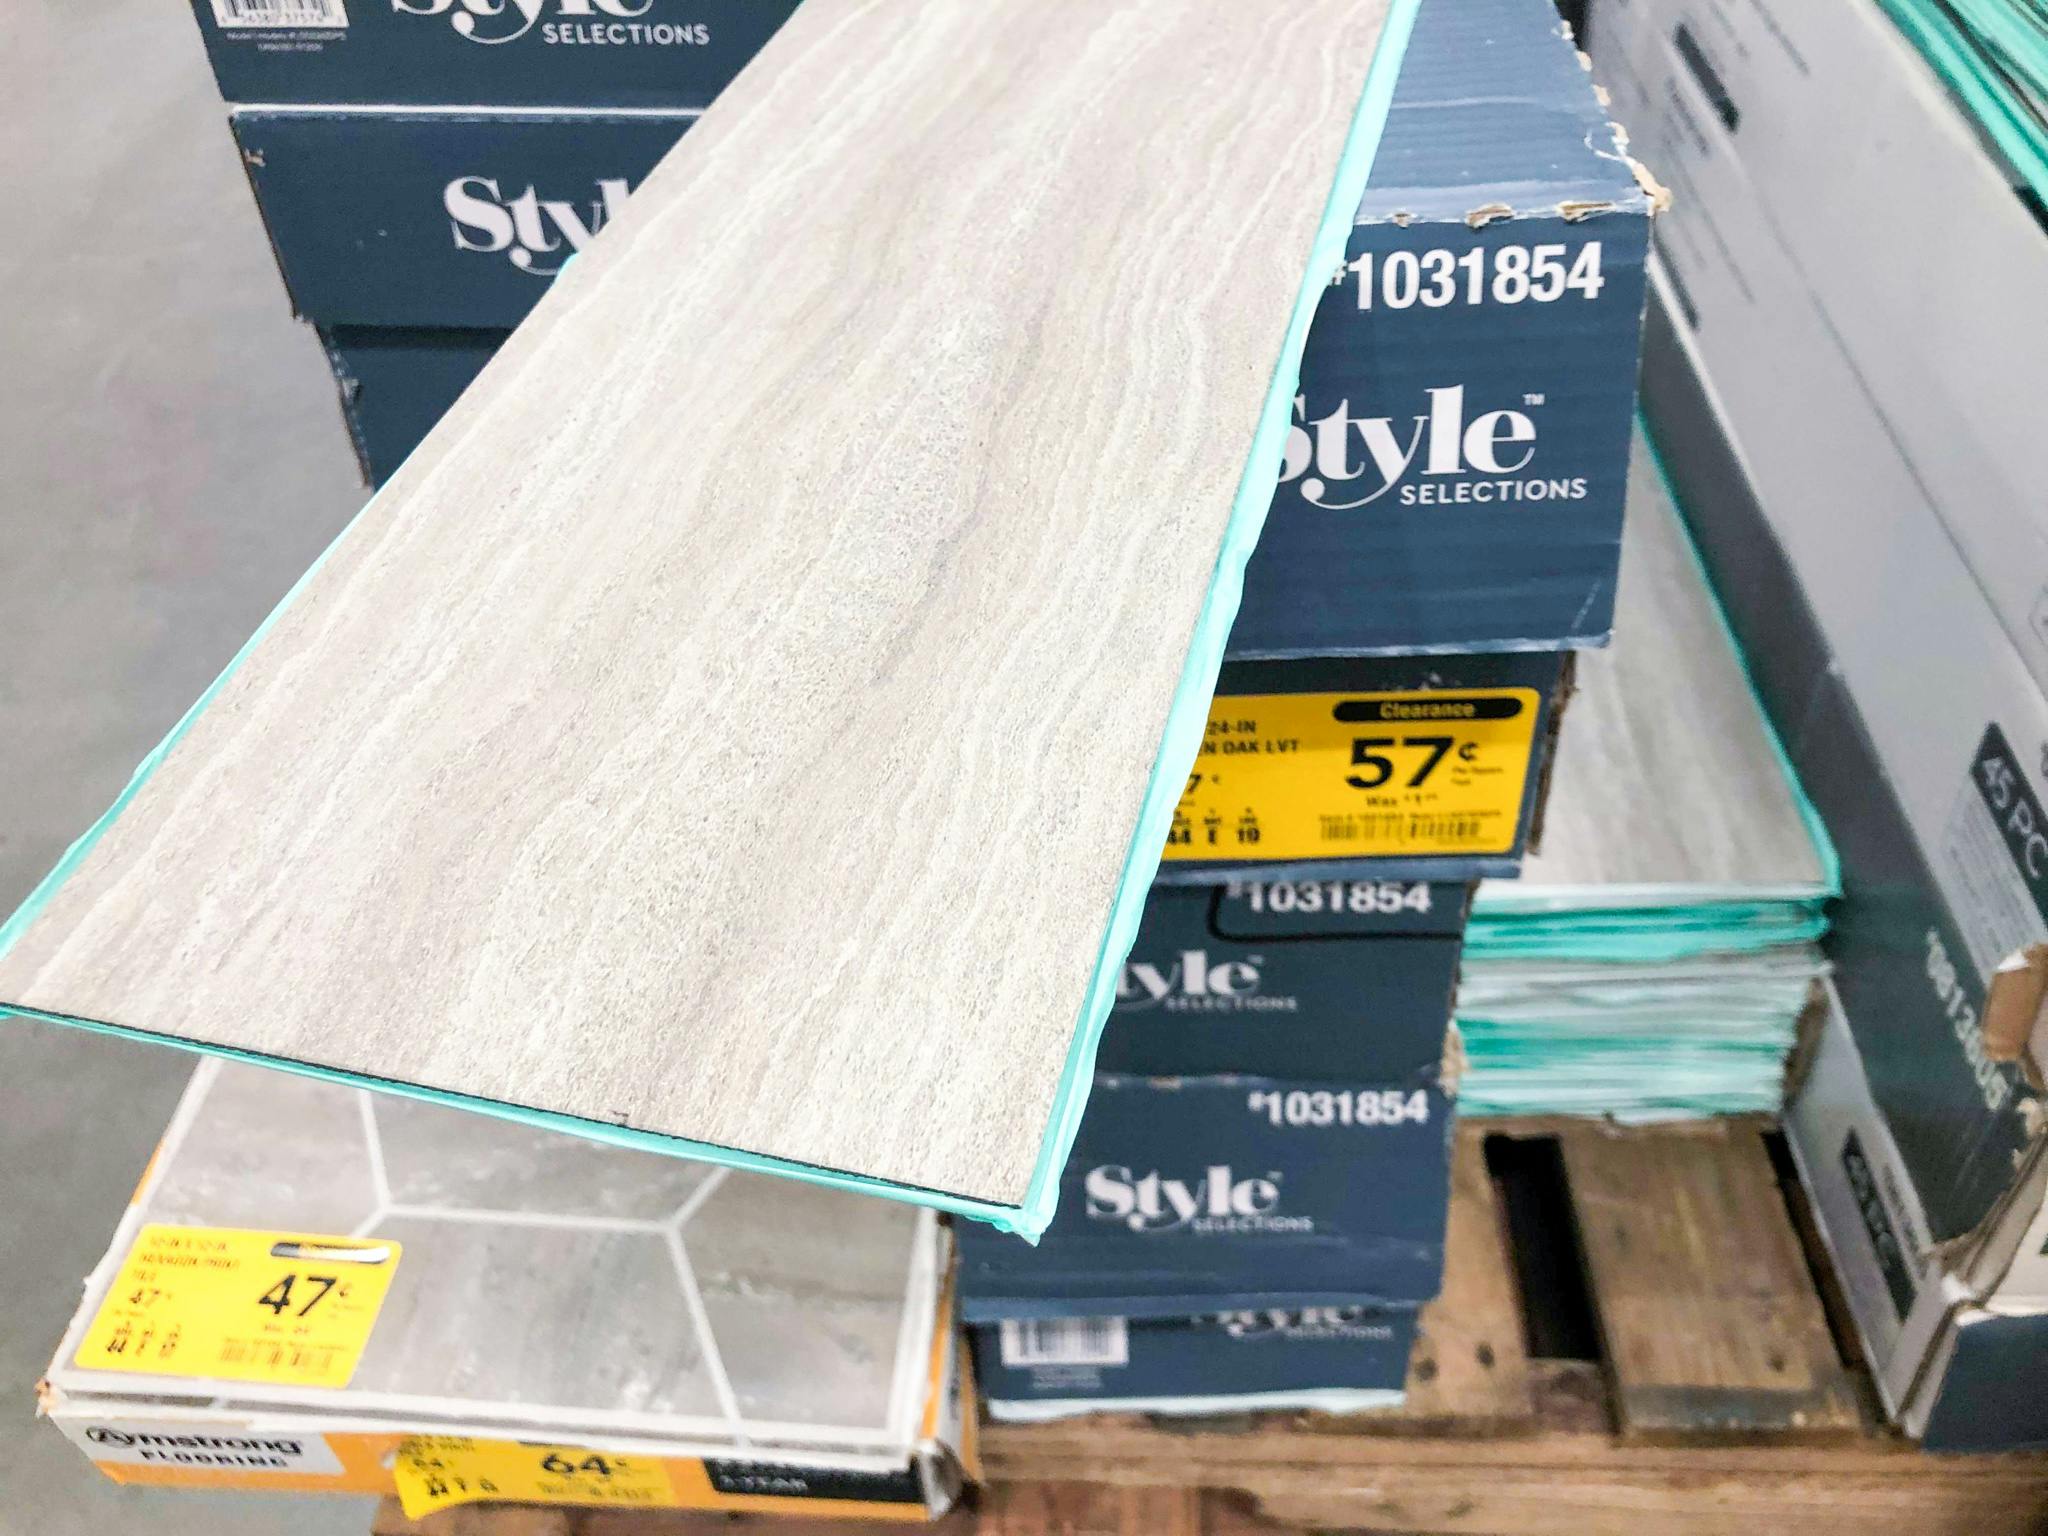 Flooring Clearance As Low As 0 37 At Lowe S The Krazy Coupon Lady